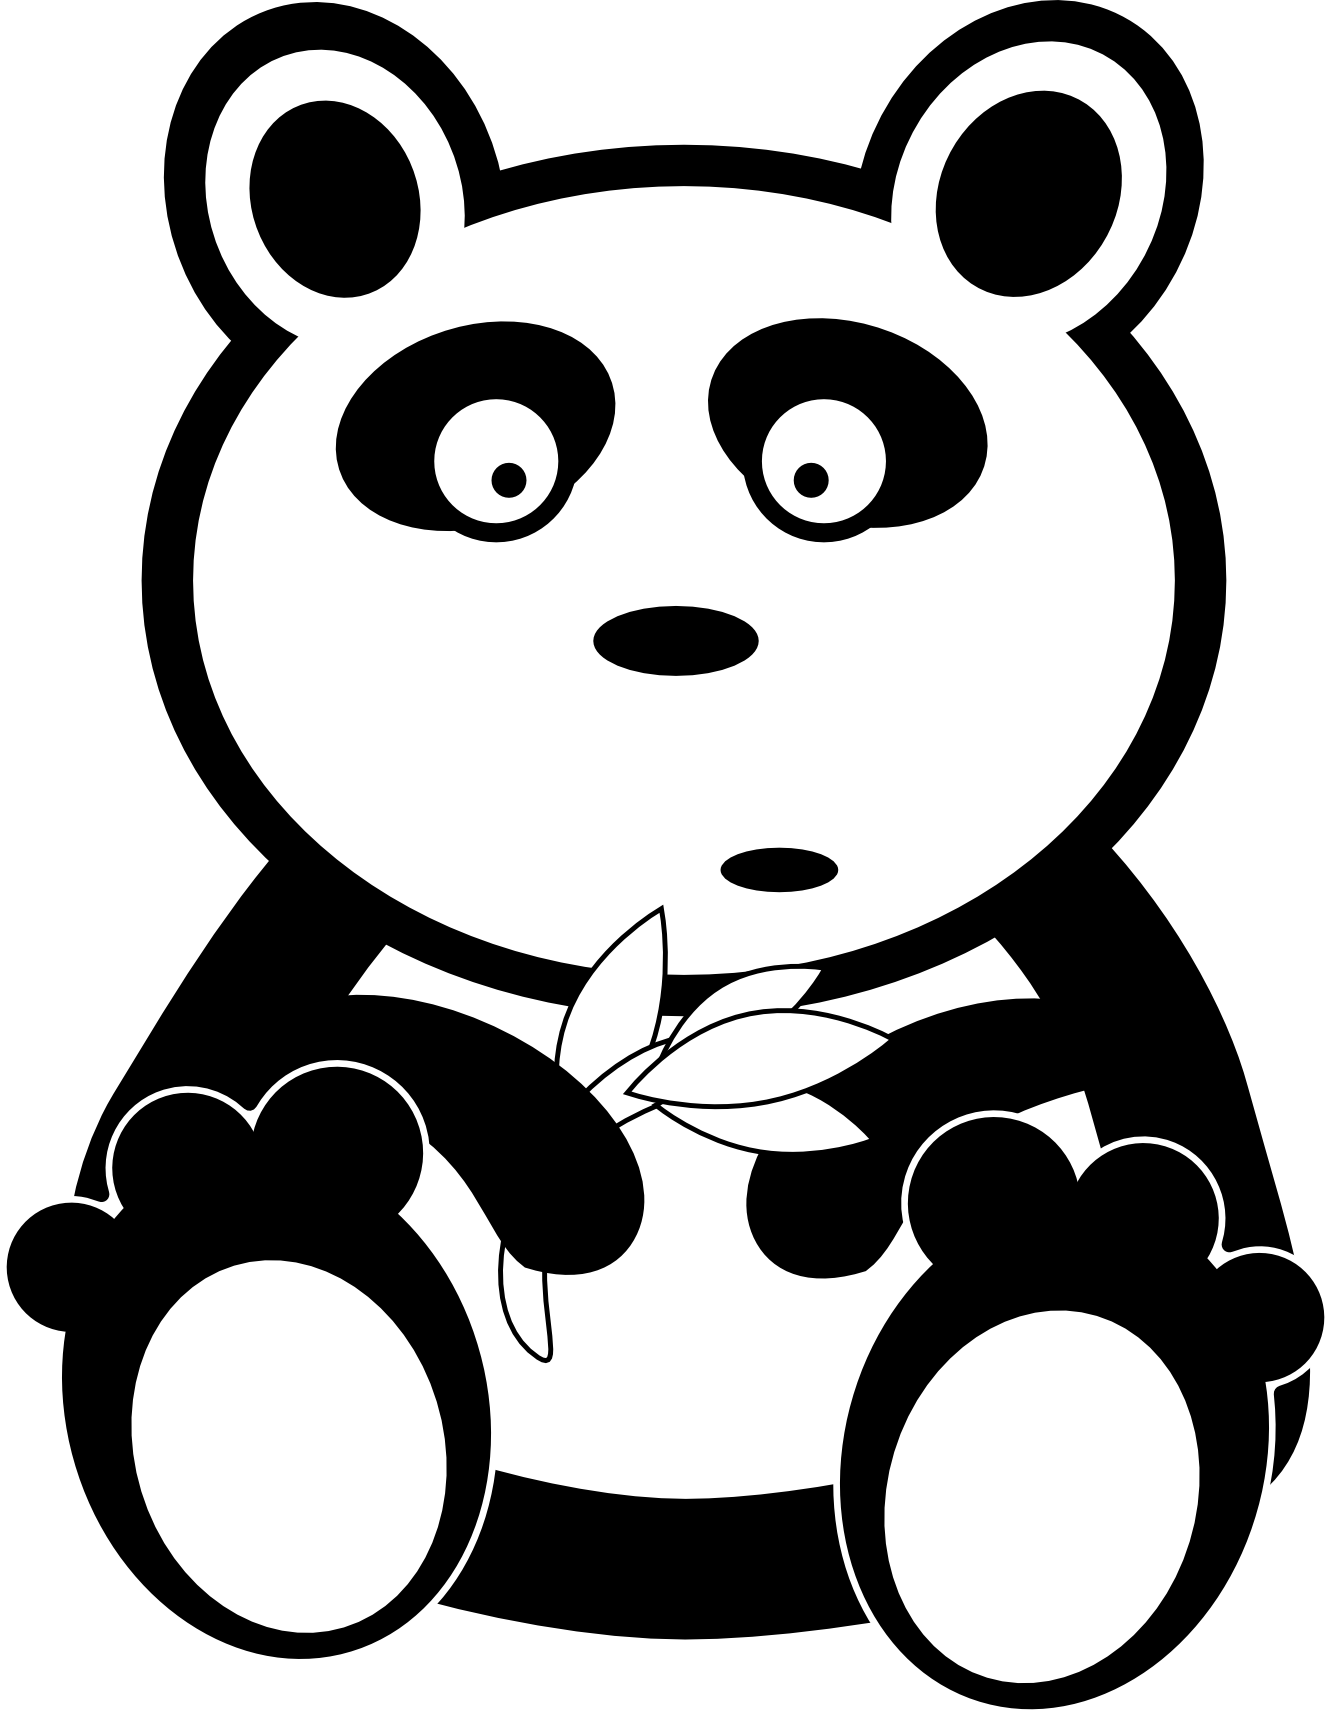 Cute Bear Clipart Black And White | Clipart library - Free Clipart 